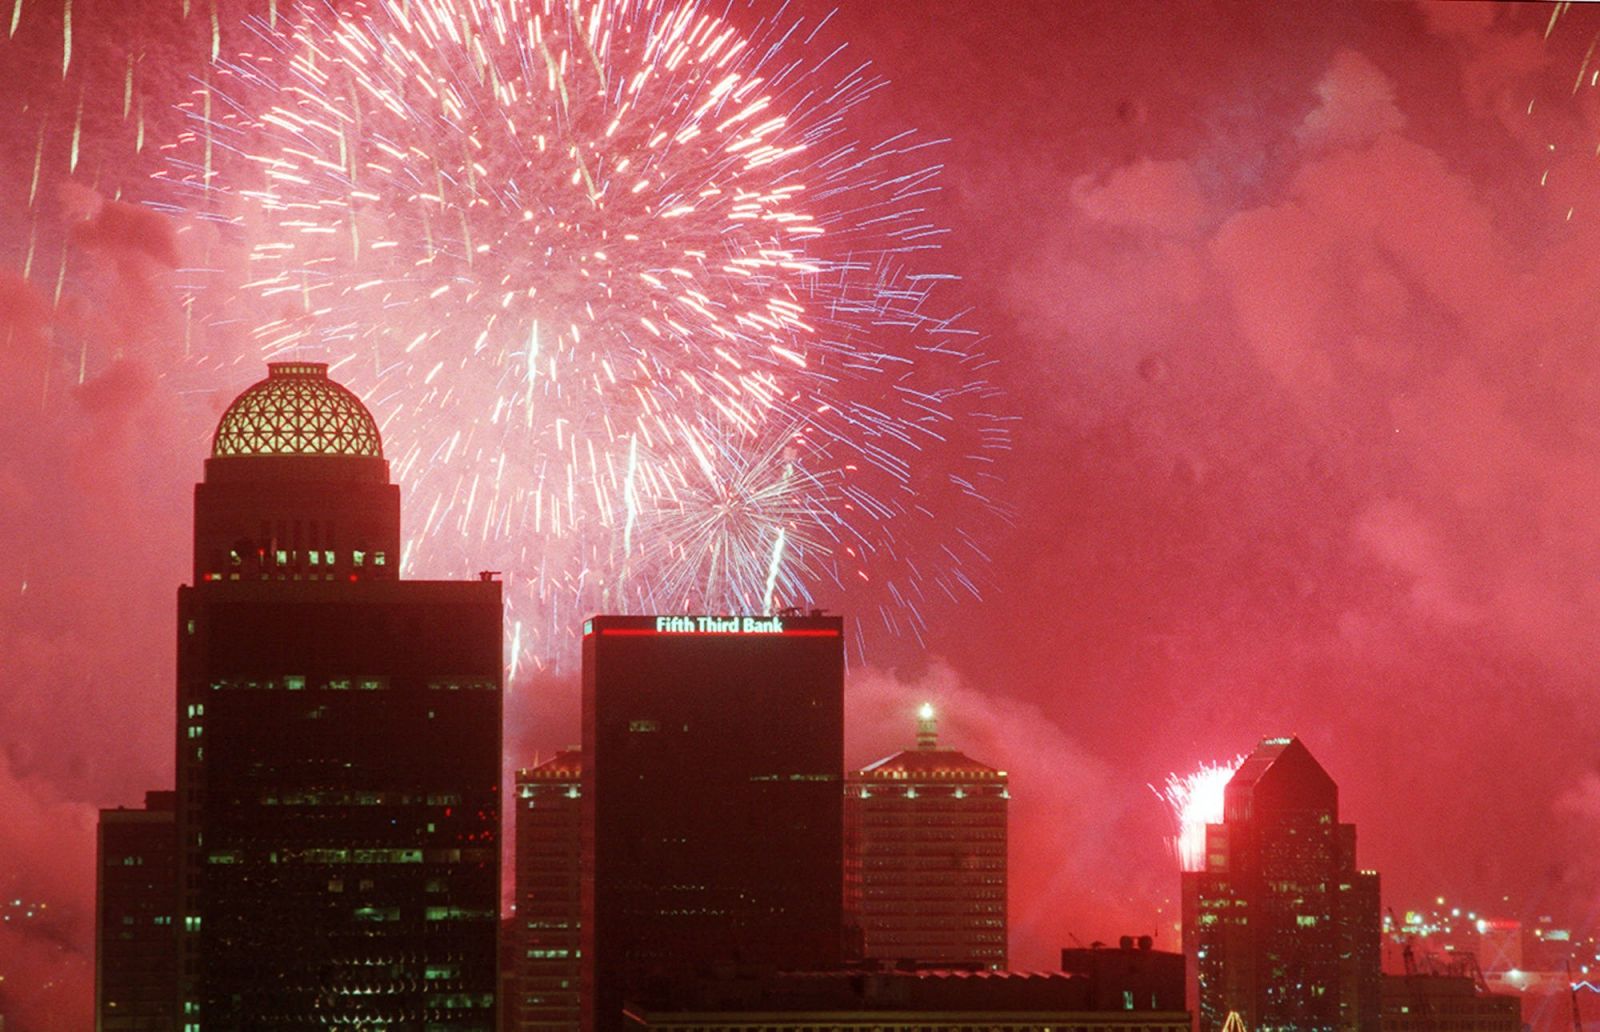 Do You Know Your Thunder Over Louisville? - Quiz